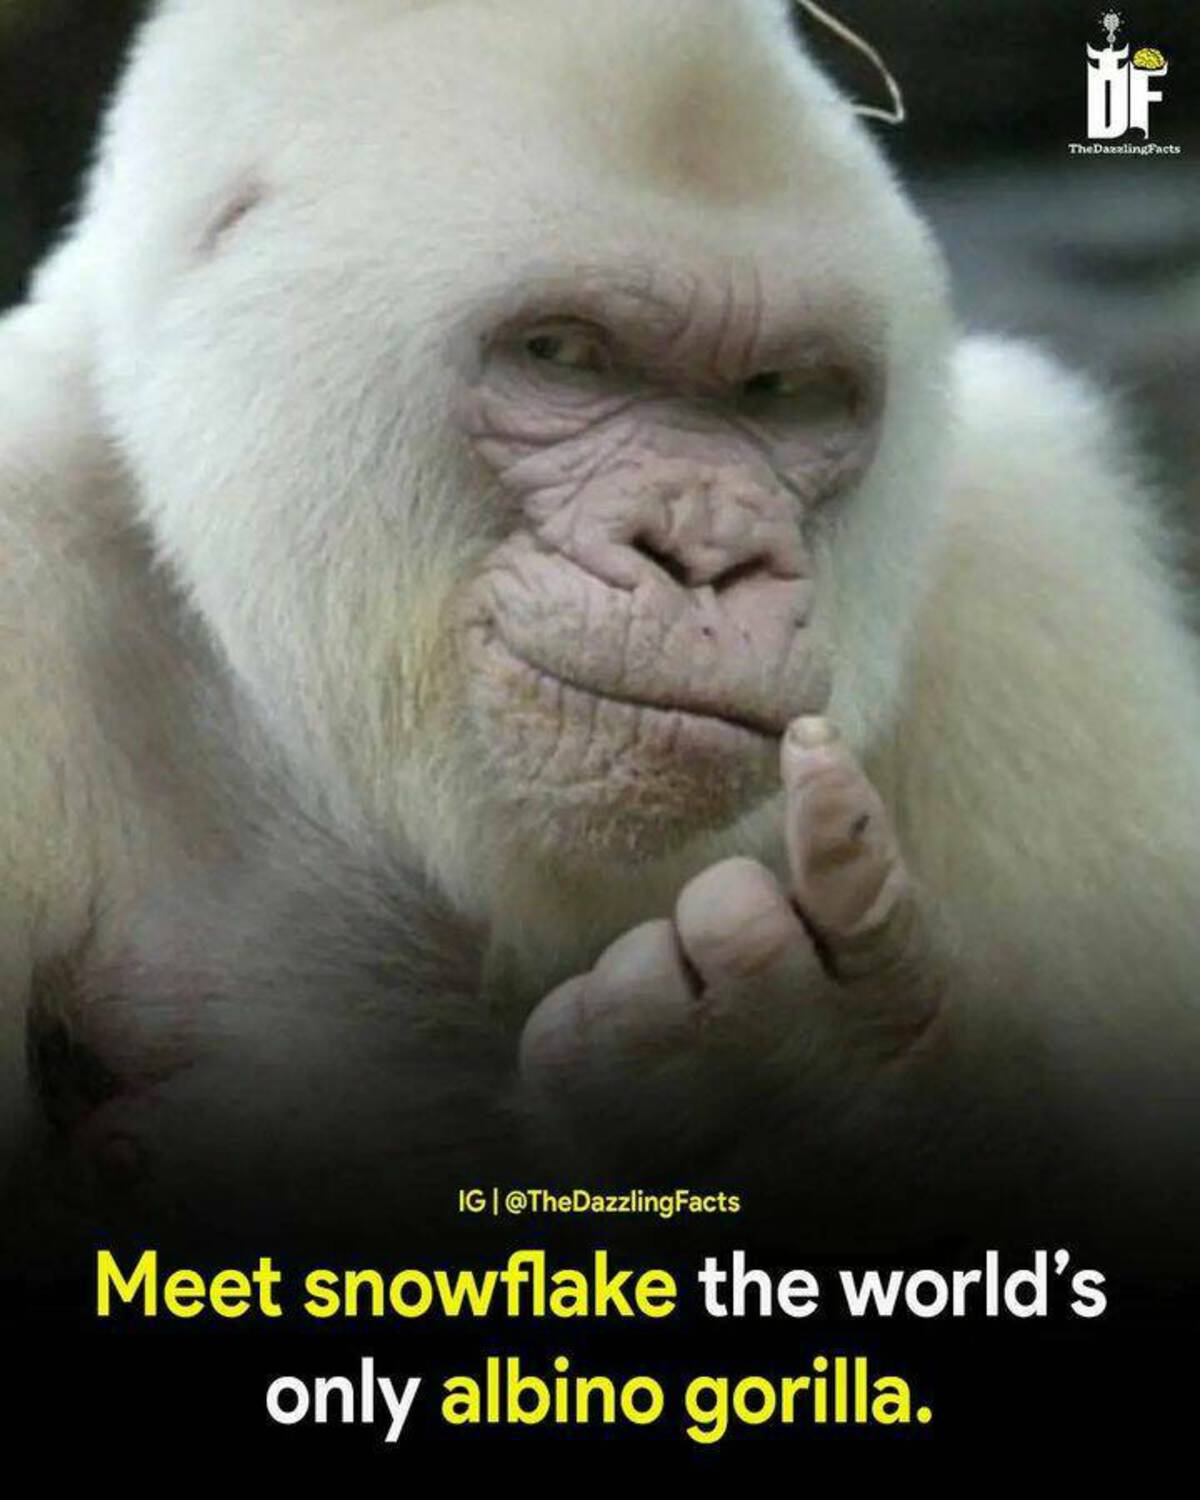 photo caption - Df The Dazzling Facts Ig Meet snowflake the world's only albino gorilla.